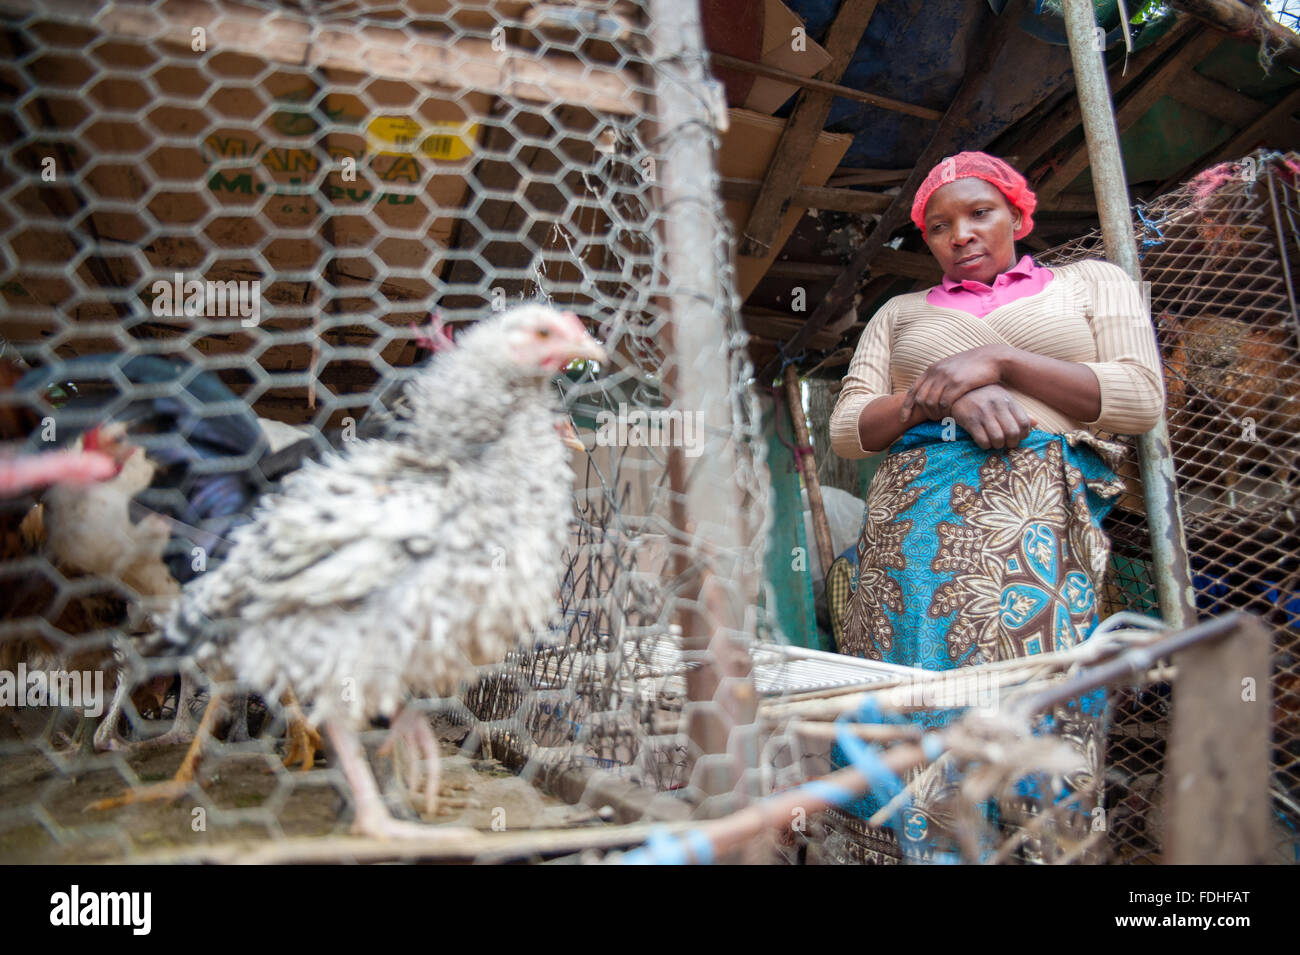 Woman selling chickens at the Manzini Wholesale Produce and Craft Market in Swaziland, Africa Stock Photo